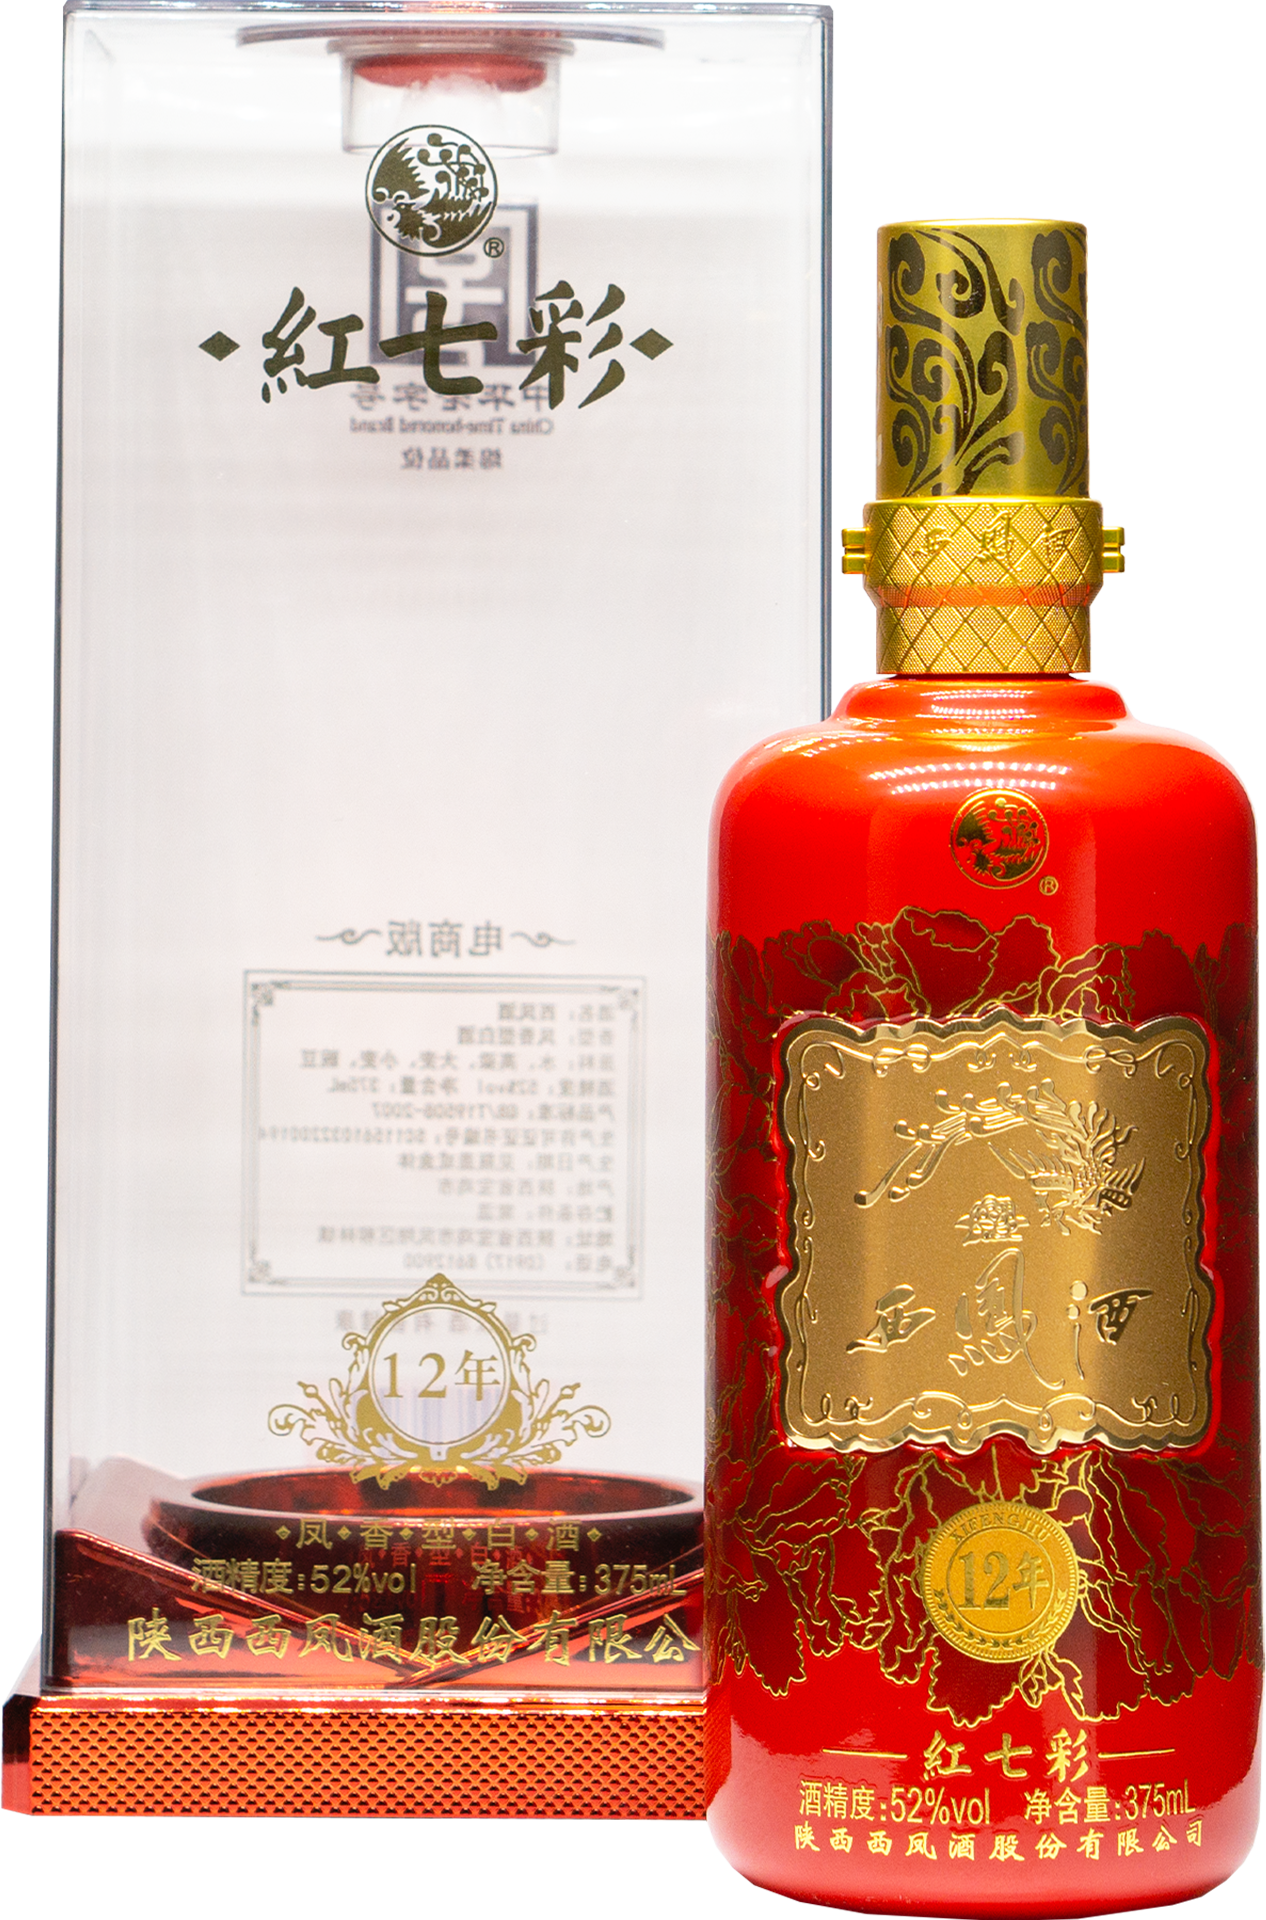 Xifeng Red 12 Year